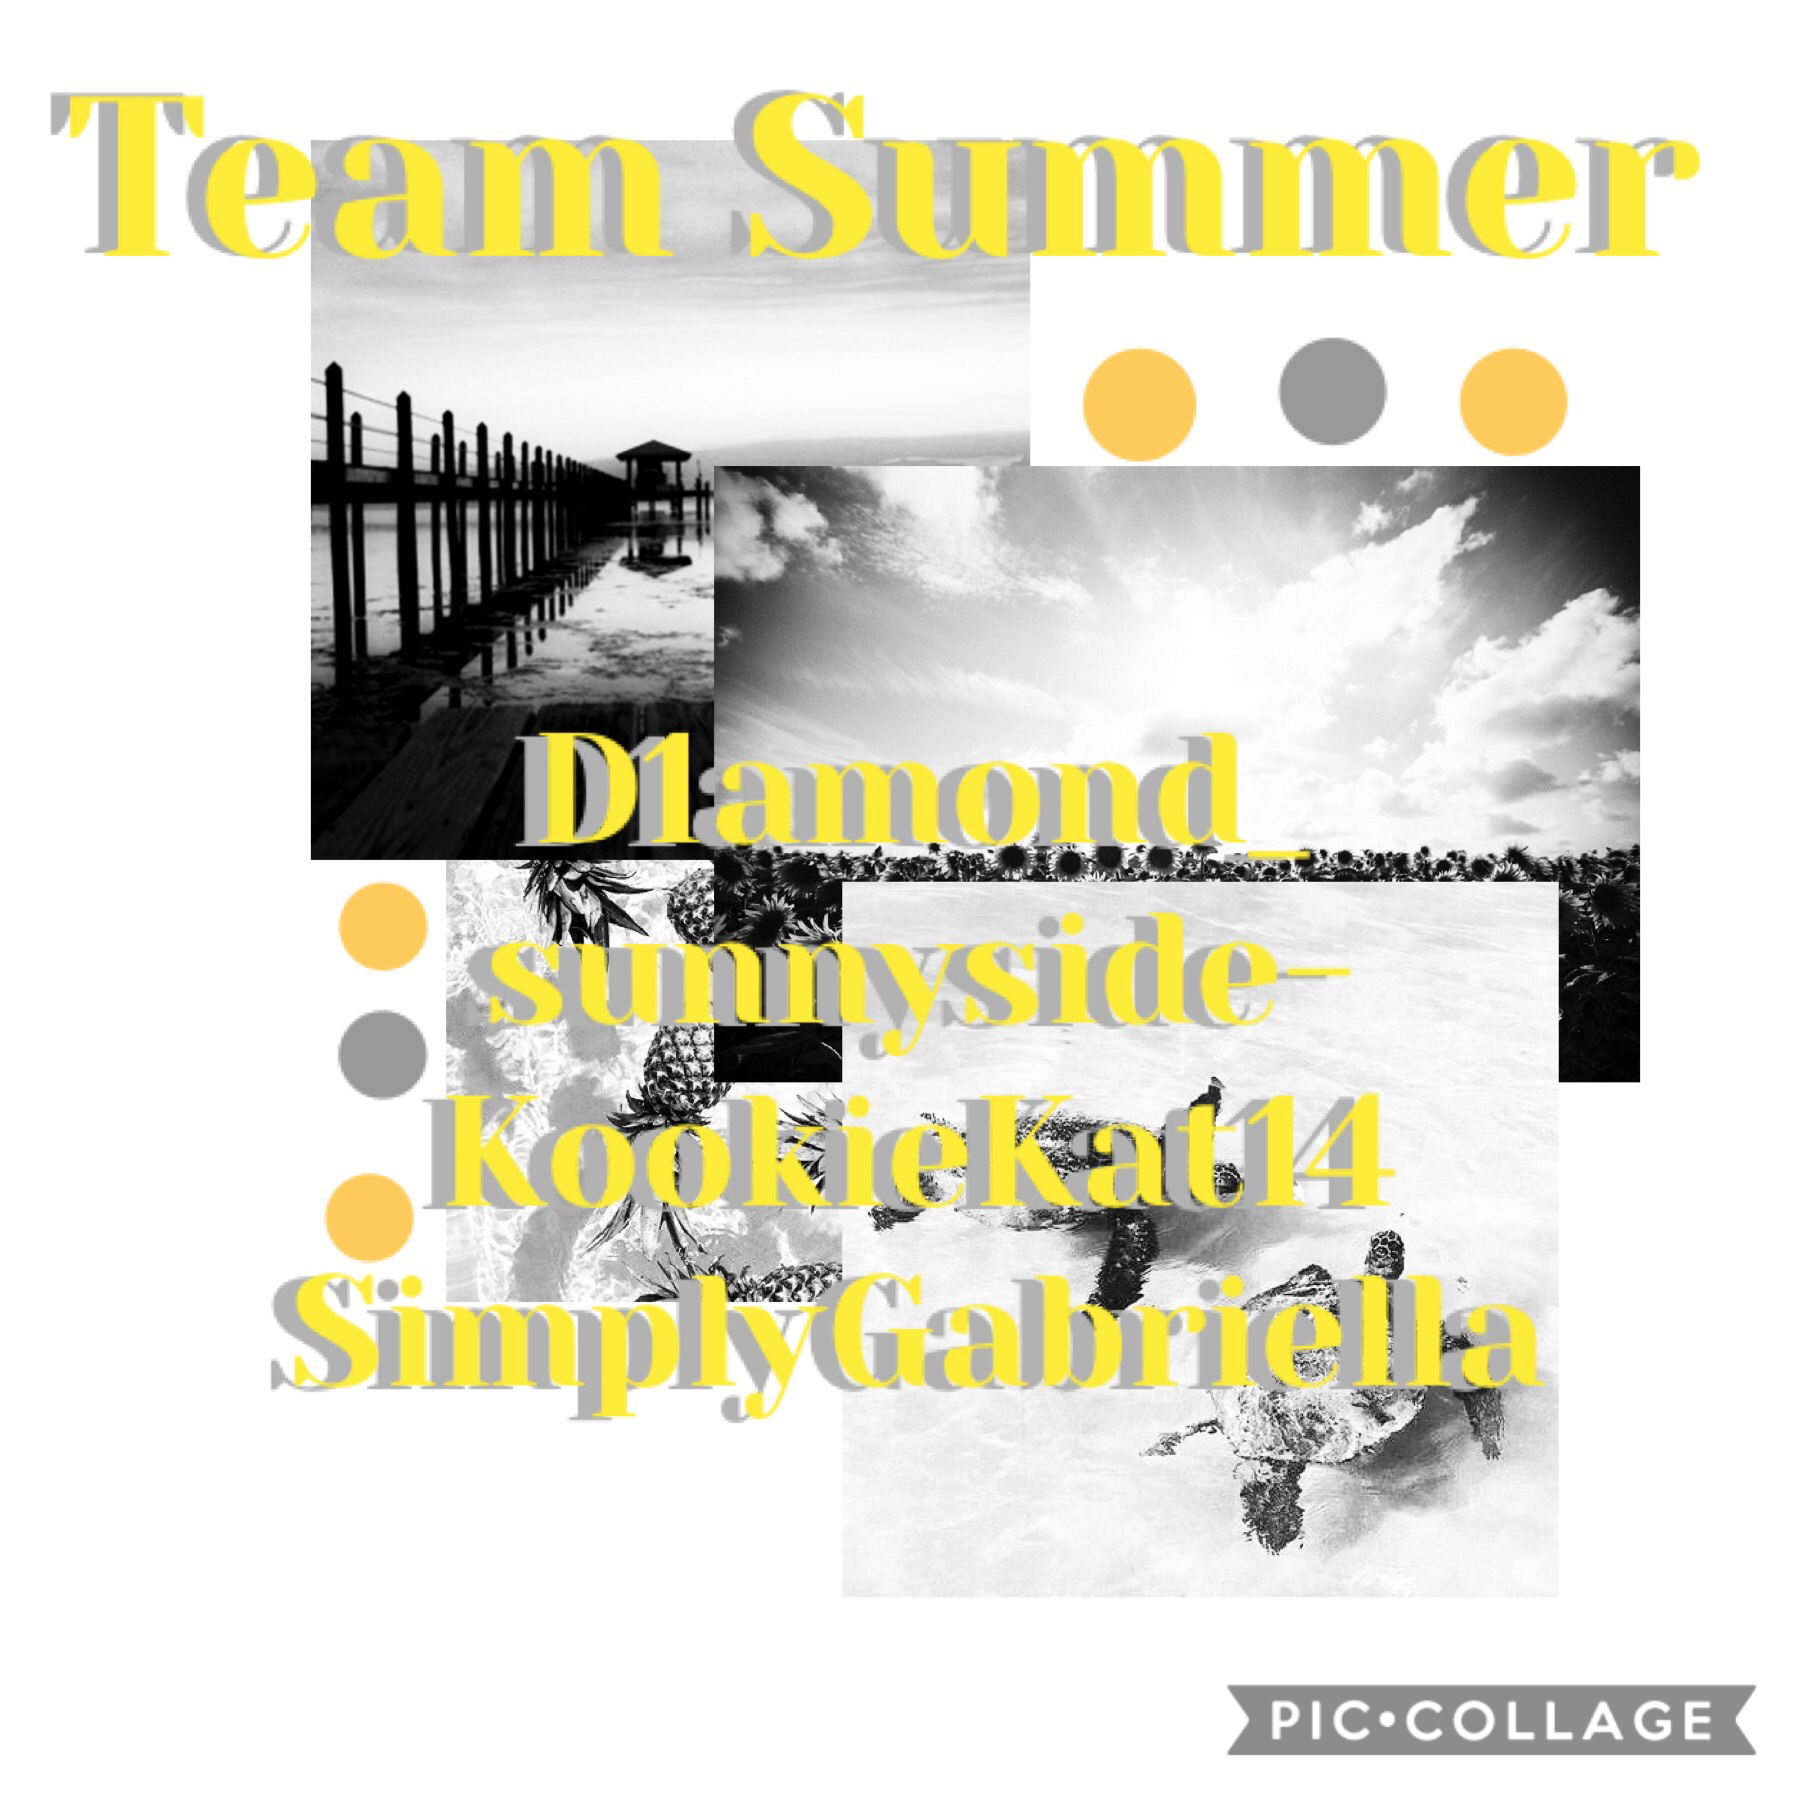 Thank you so much The_Divergent-Tribute! Now team Summer have four people! Which means I need one person for each of the other teams! 